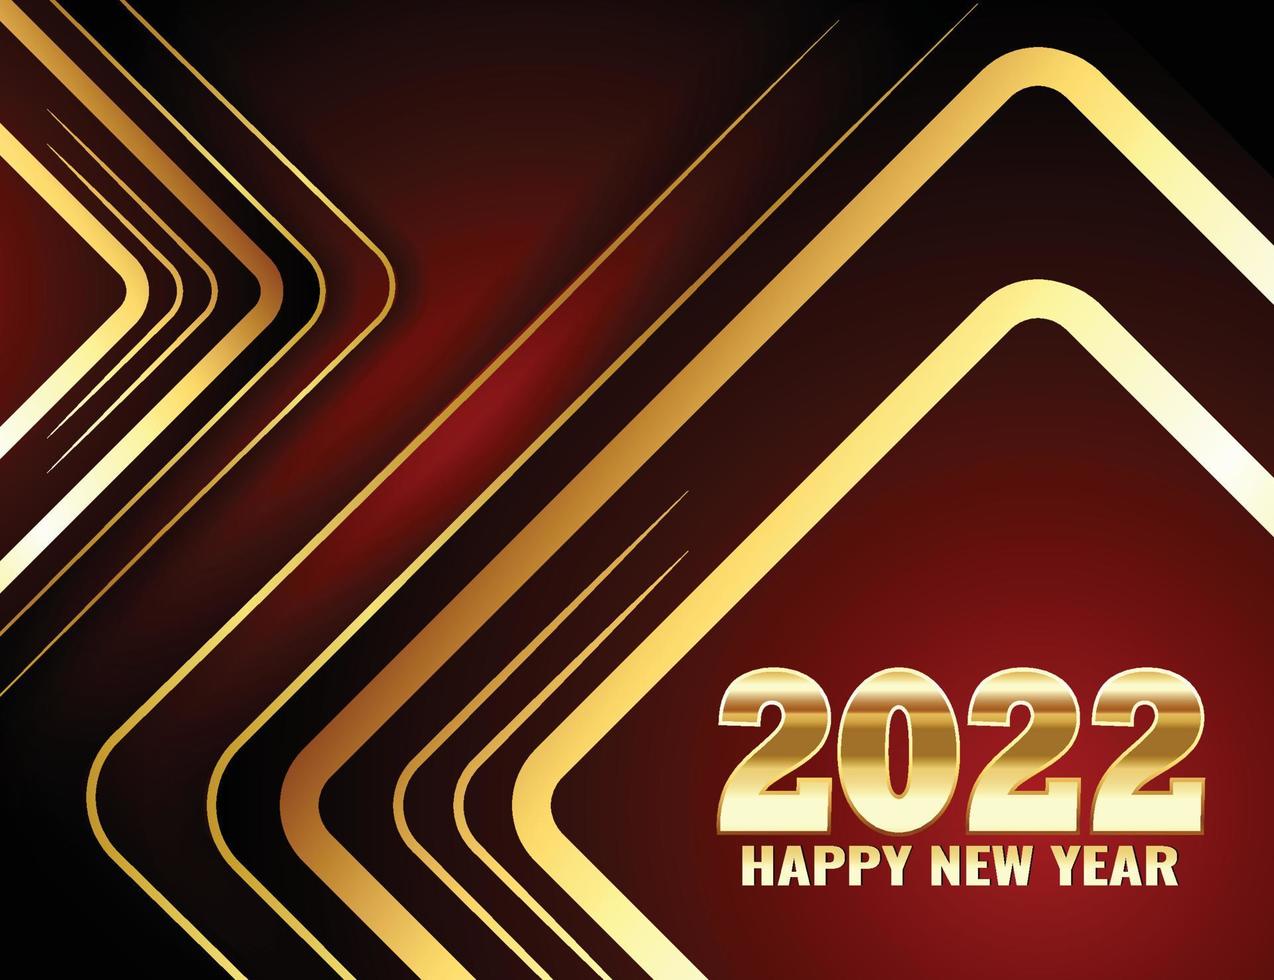 happy new year 2022 luxury red background design. vector